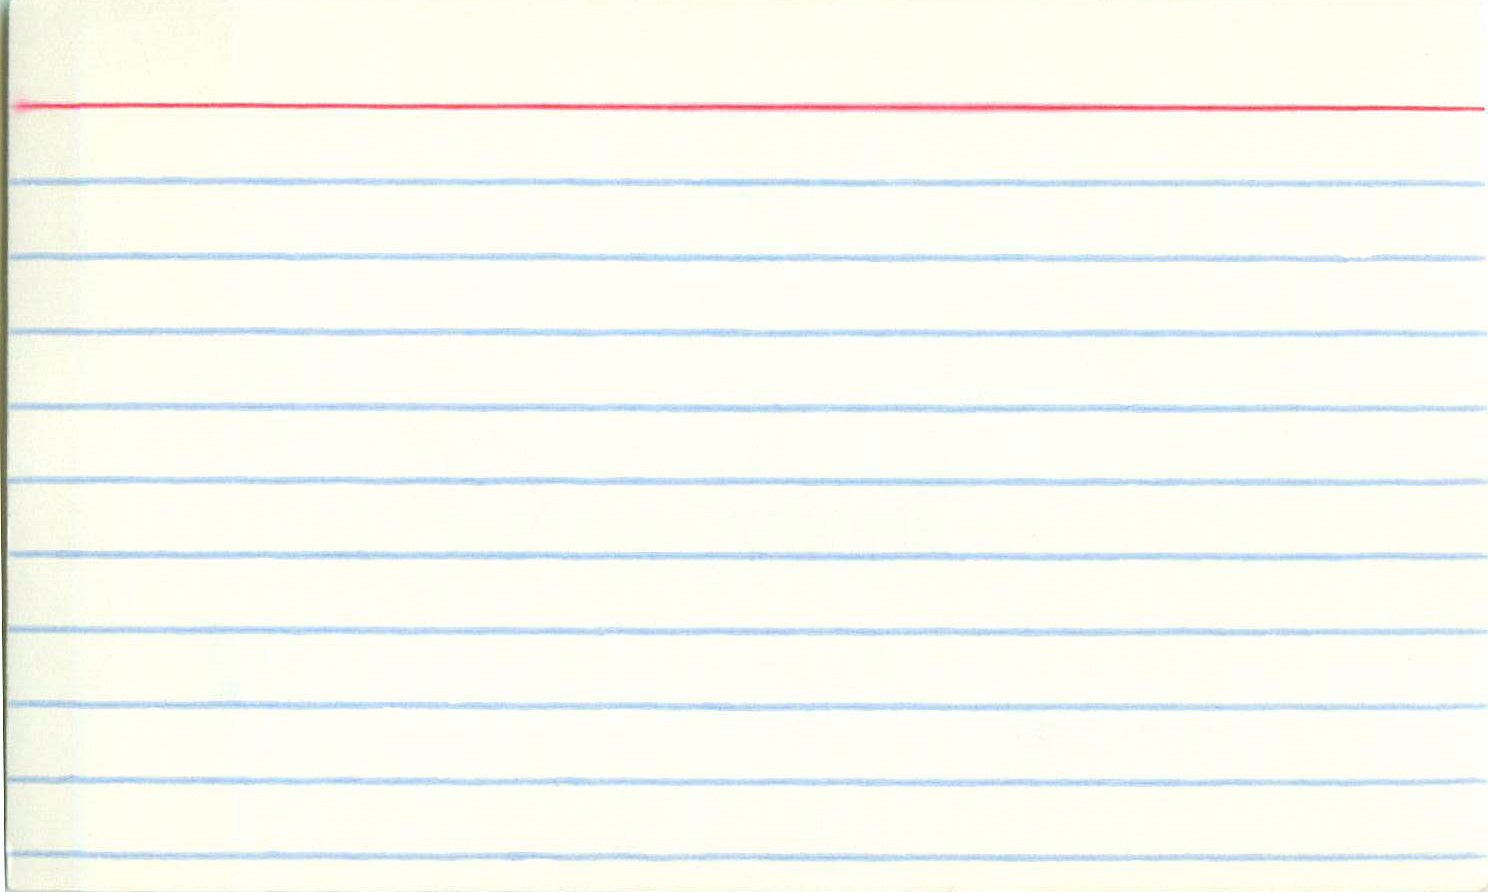 Blank index card! - StockPholio.com  Free Stock Photos Within Word Template For 3x5 Index Cards